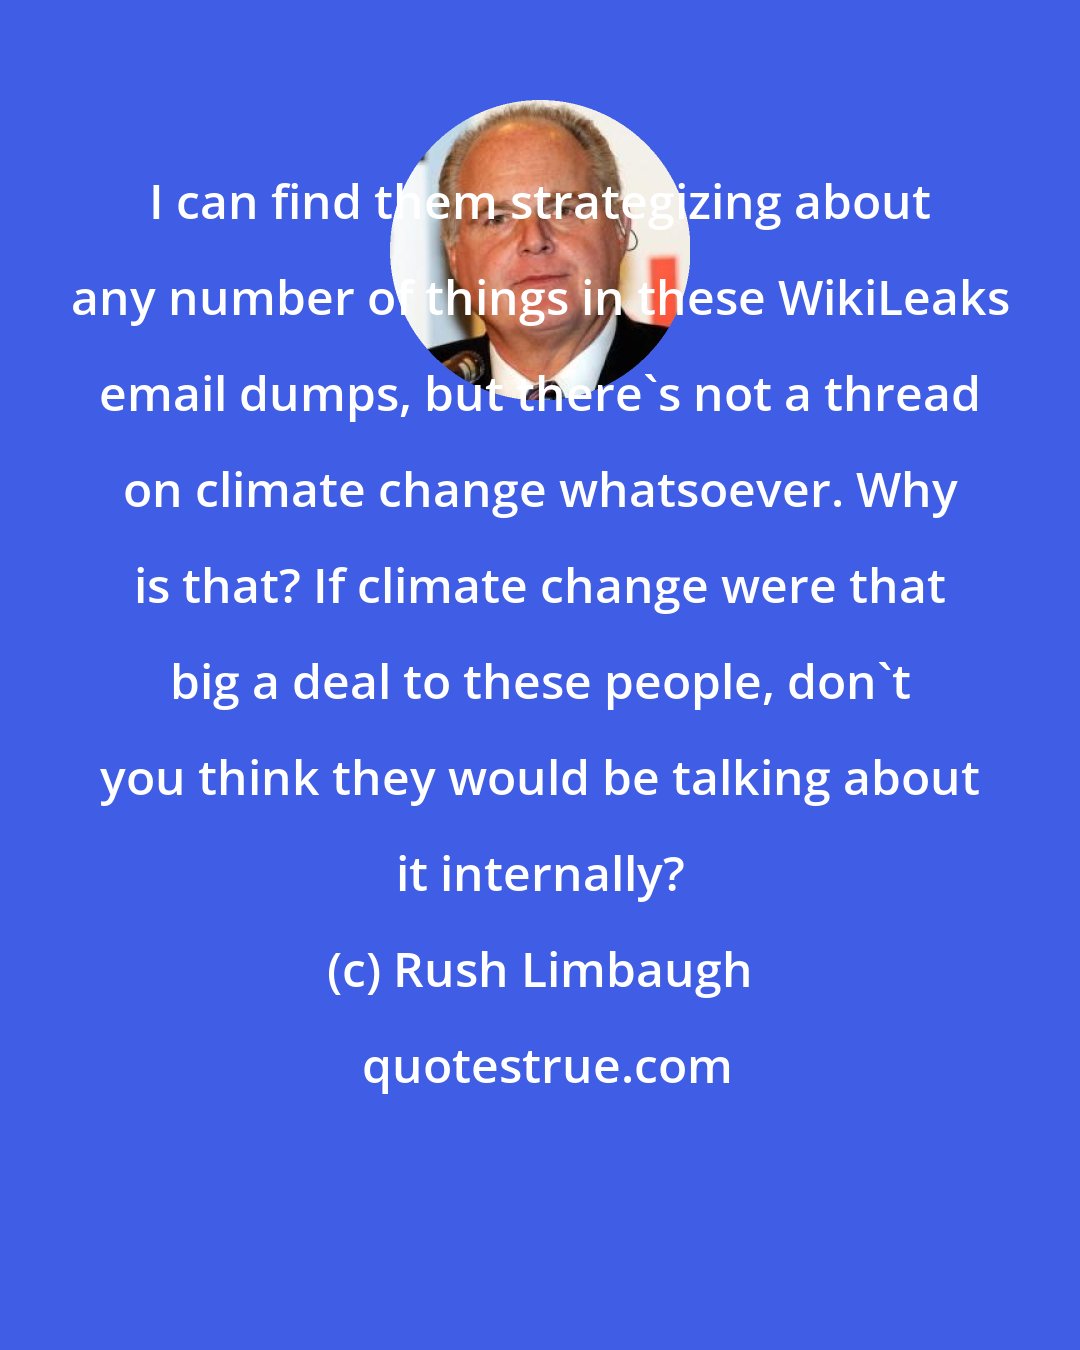 Rush Limbaugh: I can find them strategizing about any number of things in these WikiLeaks email dumps, but there's not a thread on climate change whatsoever. Why is that? If climate change were that big a deal to these people, don't you think they would be talking about it internally?